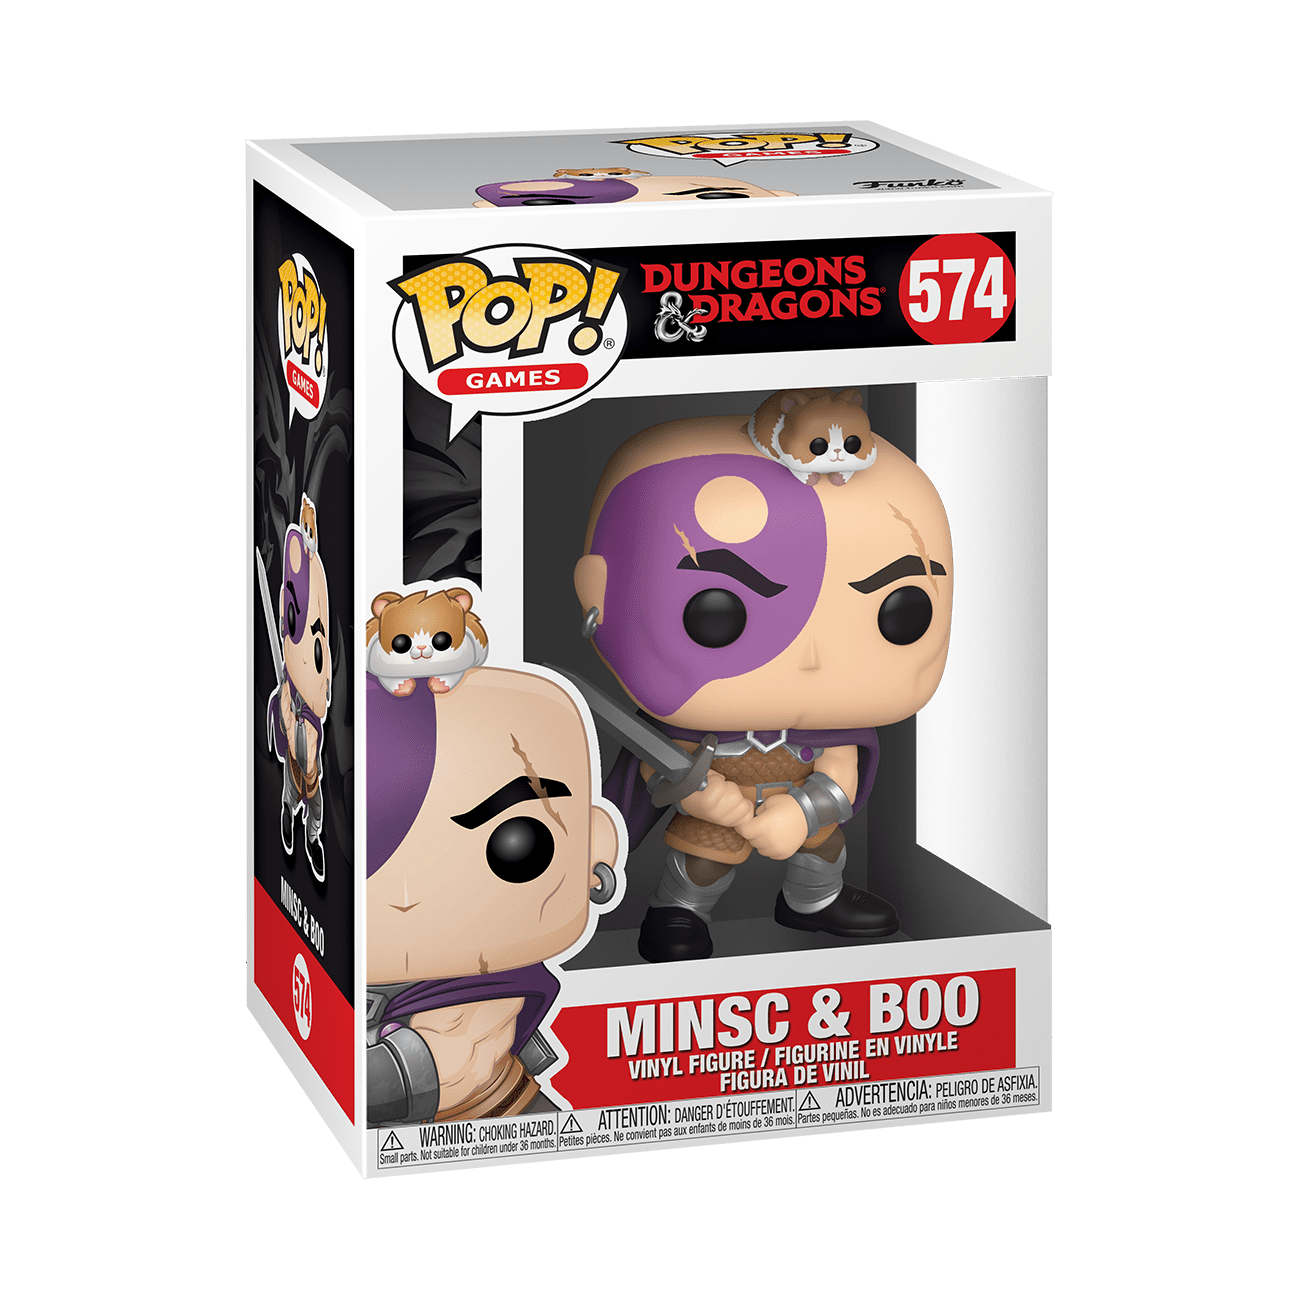 2020, Toy NEUF Funko Pop Games: Minsc & Boo Dungeons & Dragons 